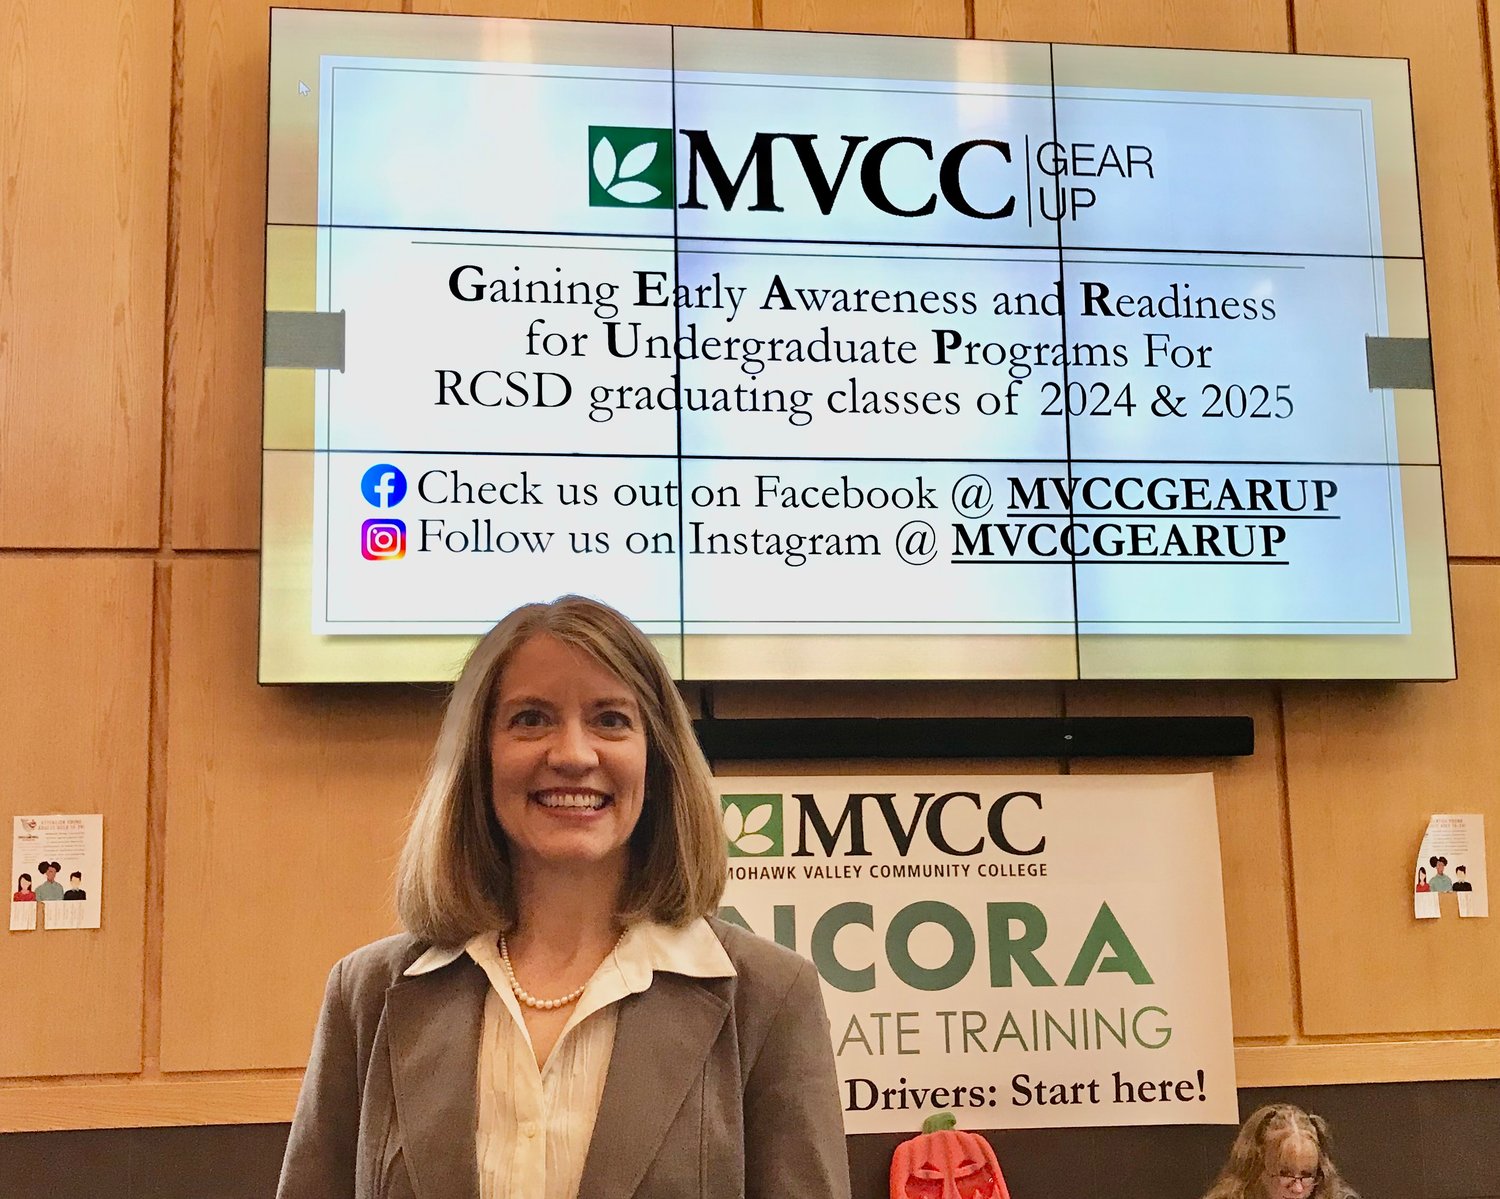 Jennifer DeWeerth is the new dean of MVCC’s Rome campus and community outreach.